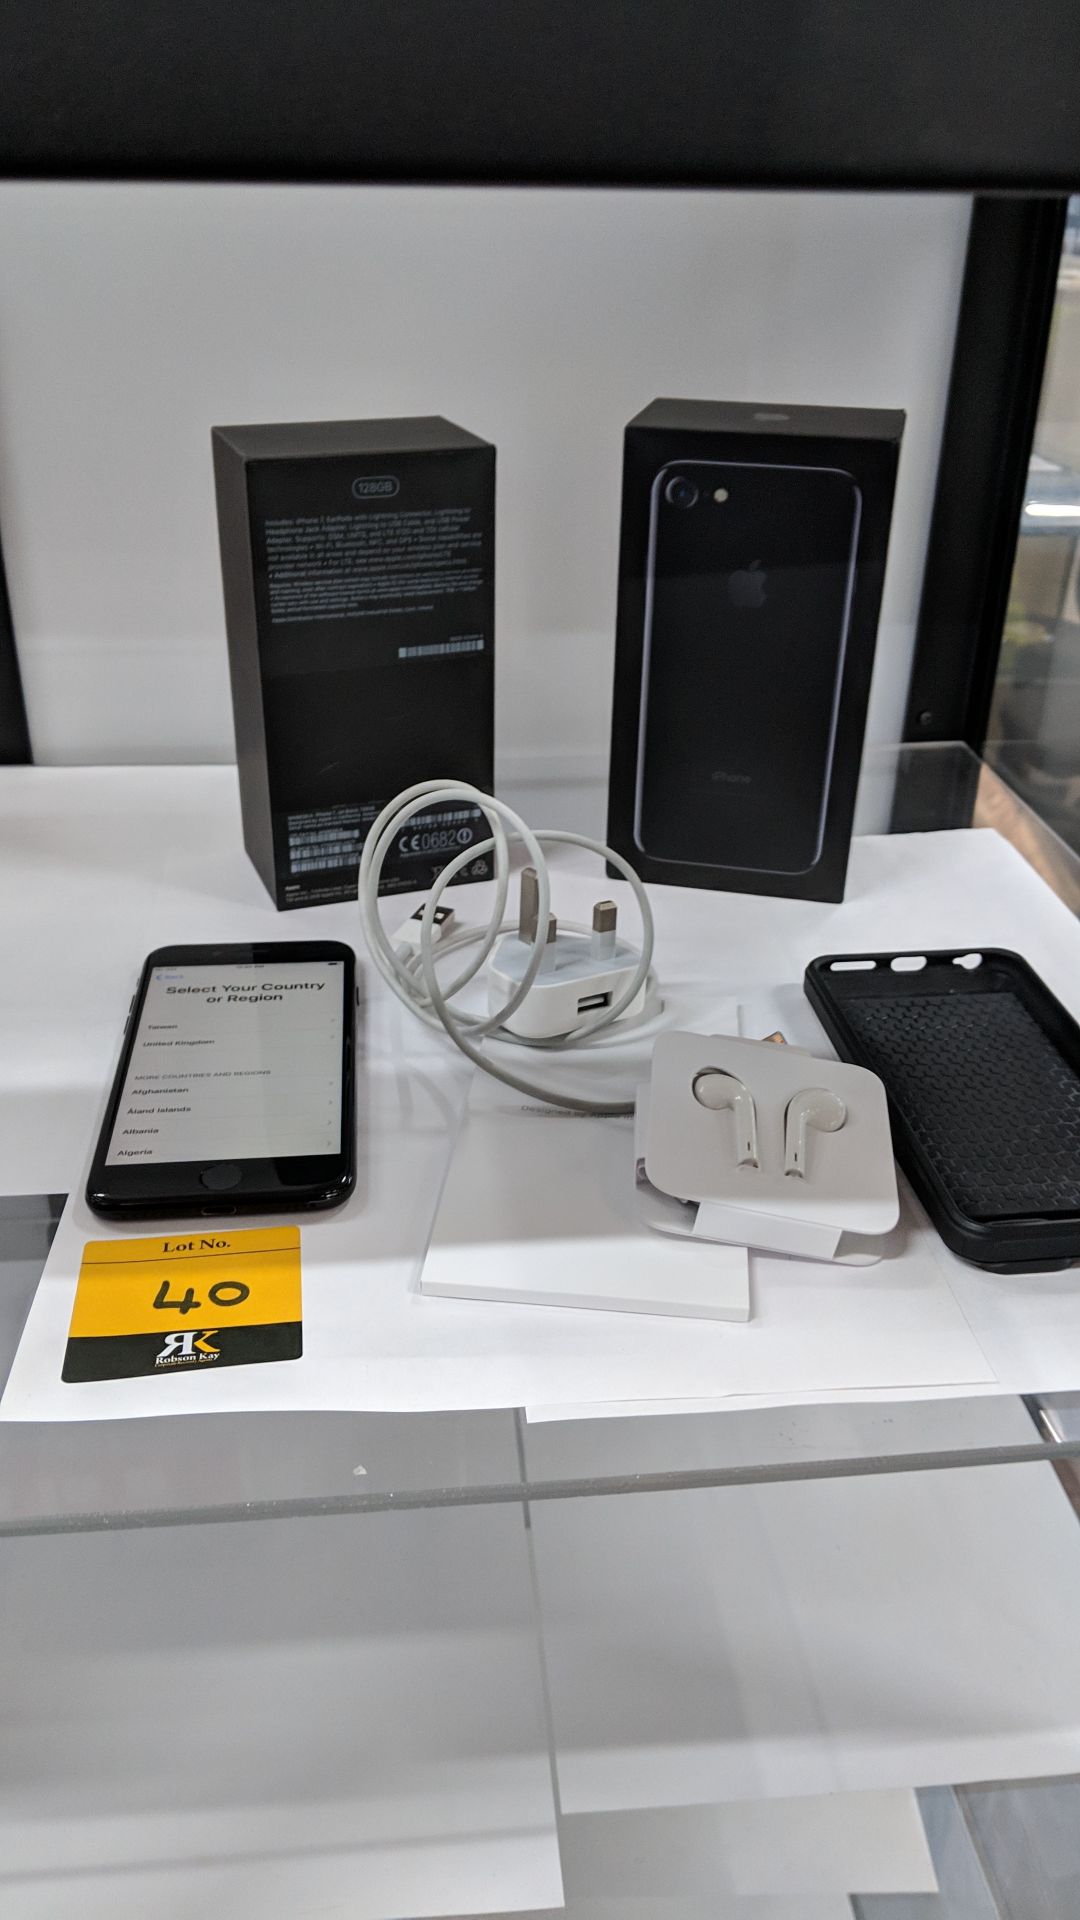 Apple iPhone 7, Jet Black, 128Gb, model A1778 with charger, earphones, box and non-Apple - Image 16 of 18